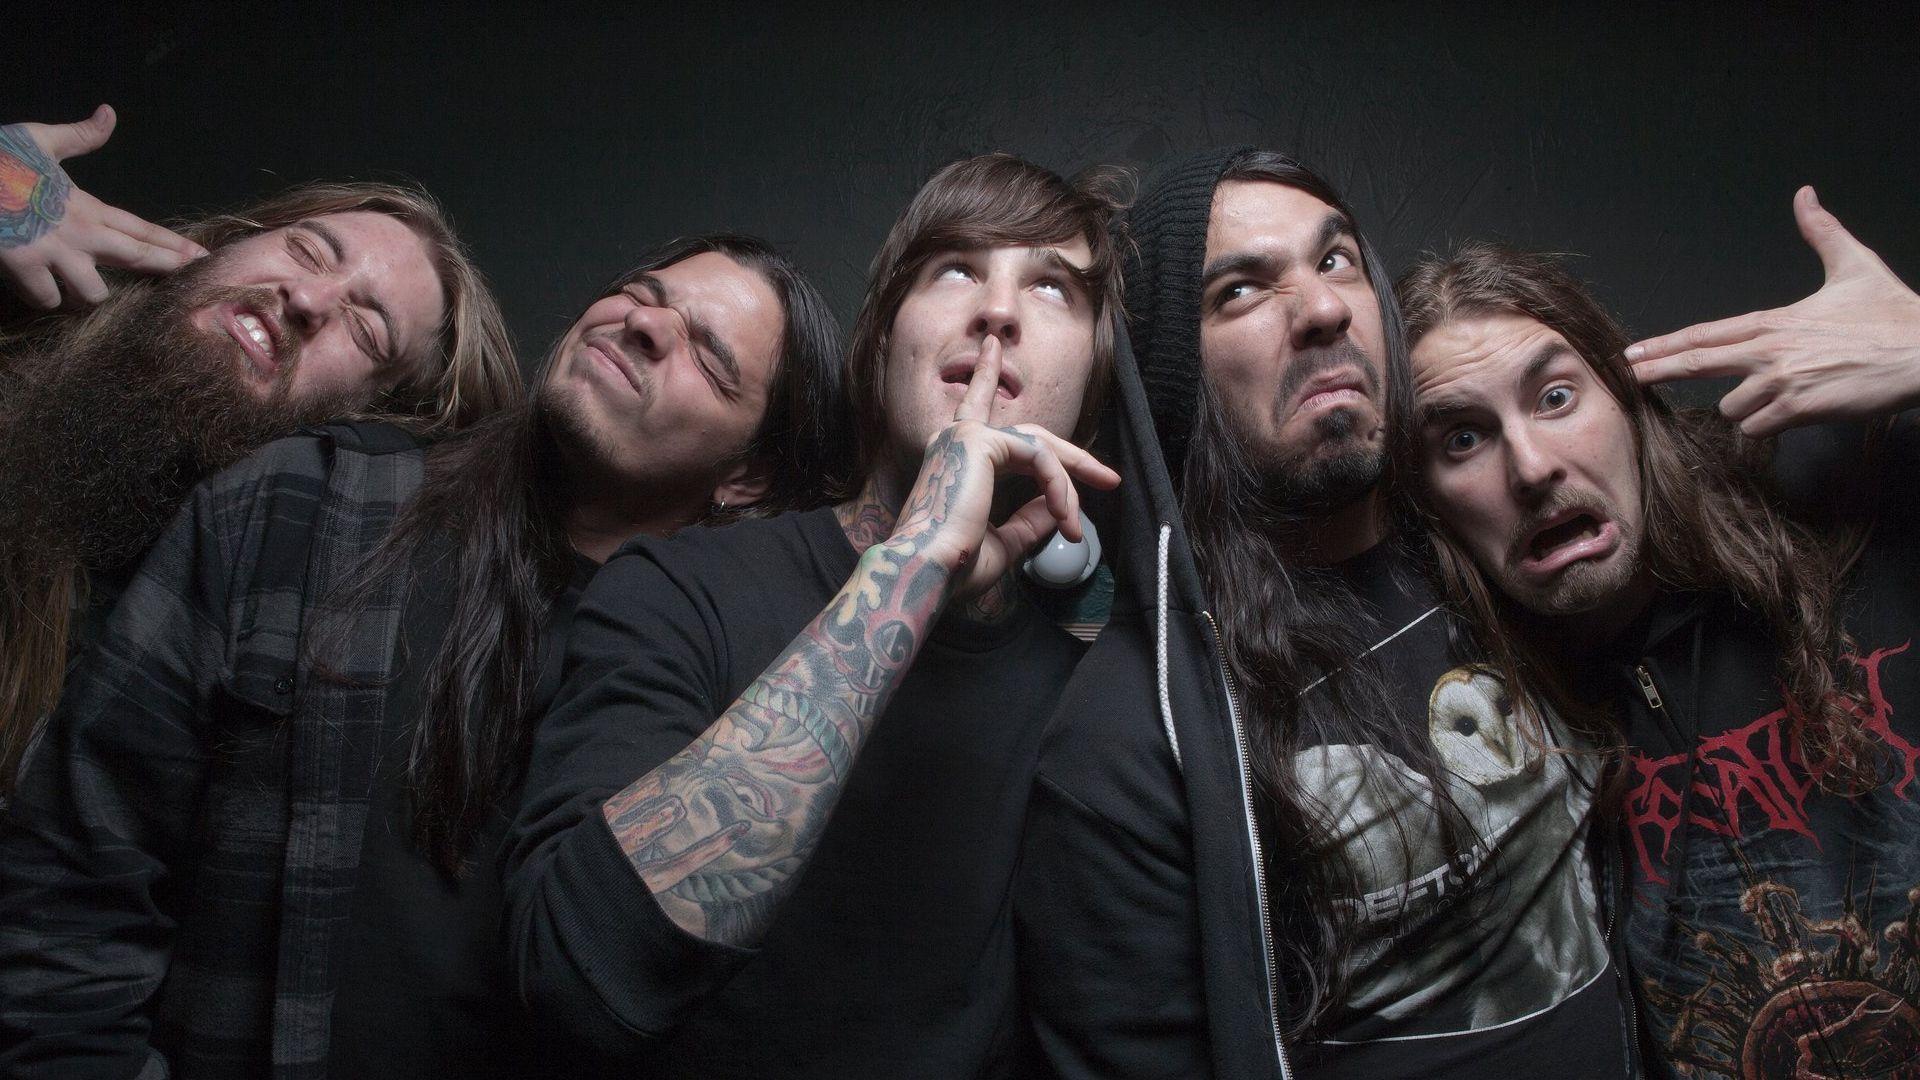 Download wallpaper 1920x1080 suicide silence, deathcore, mark